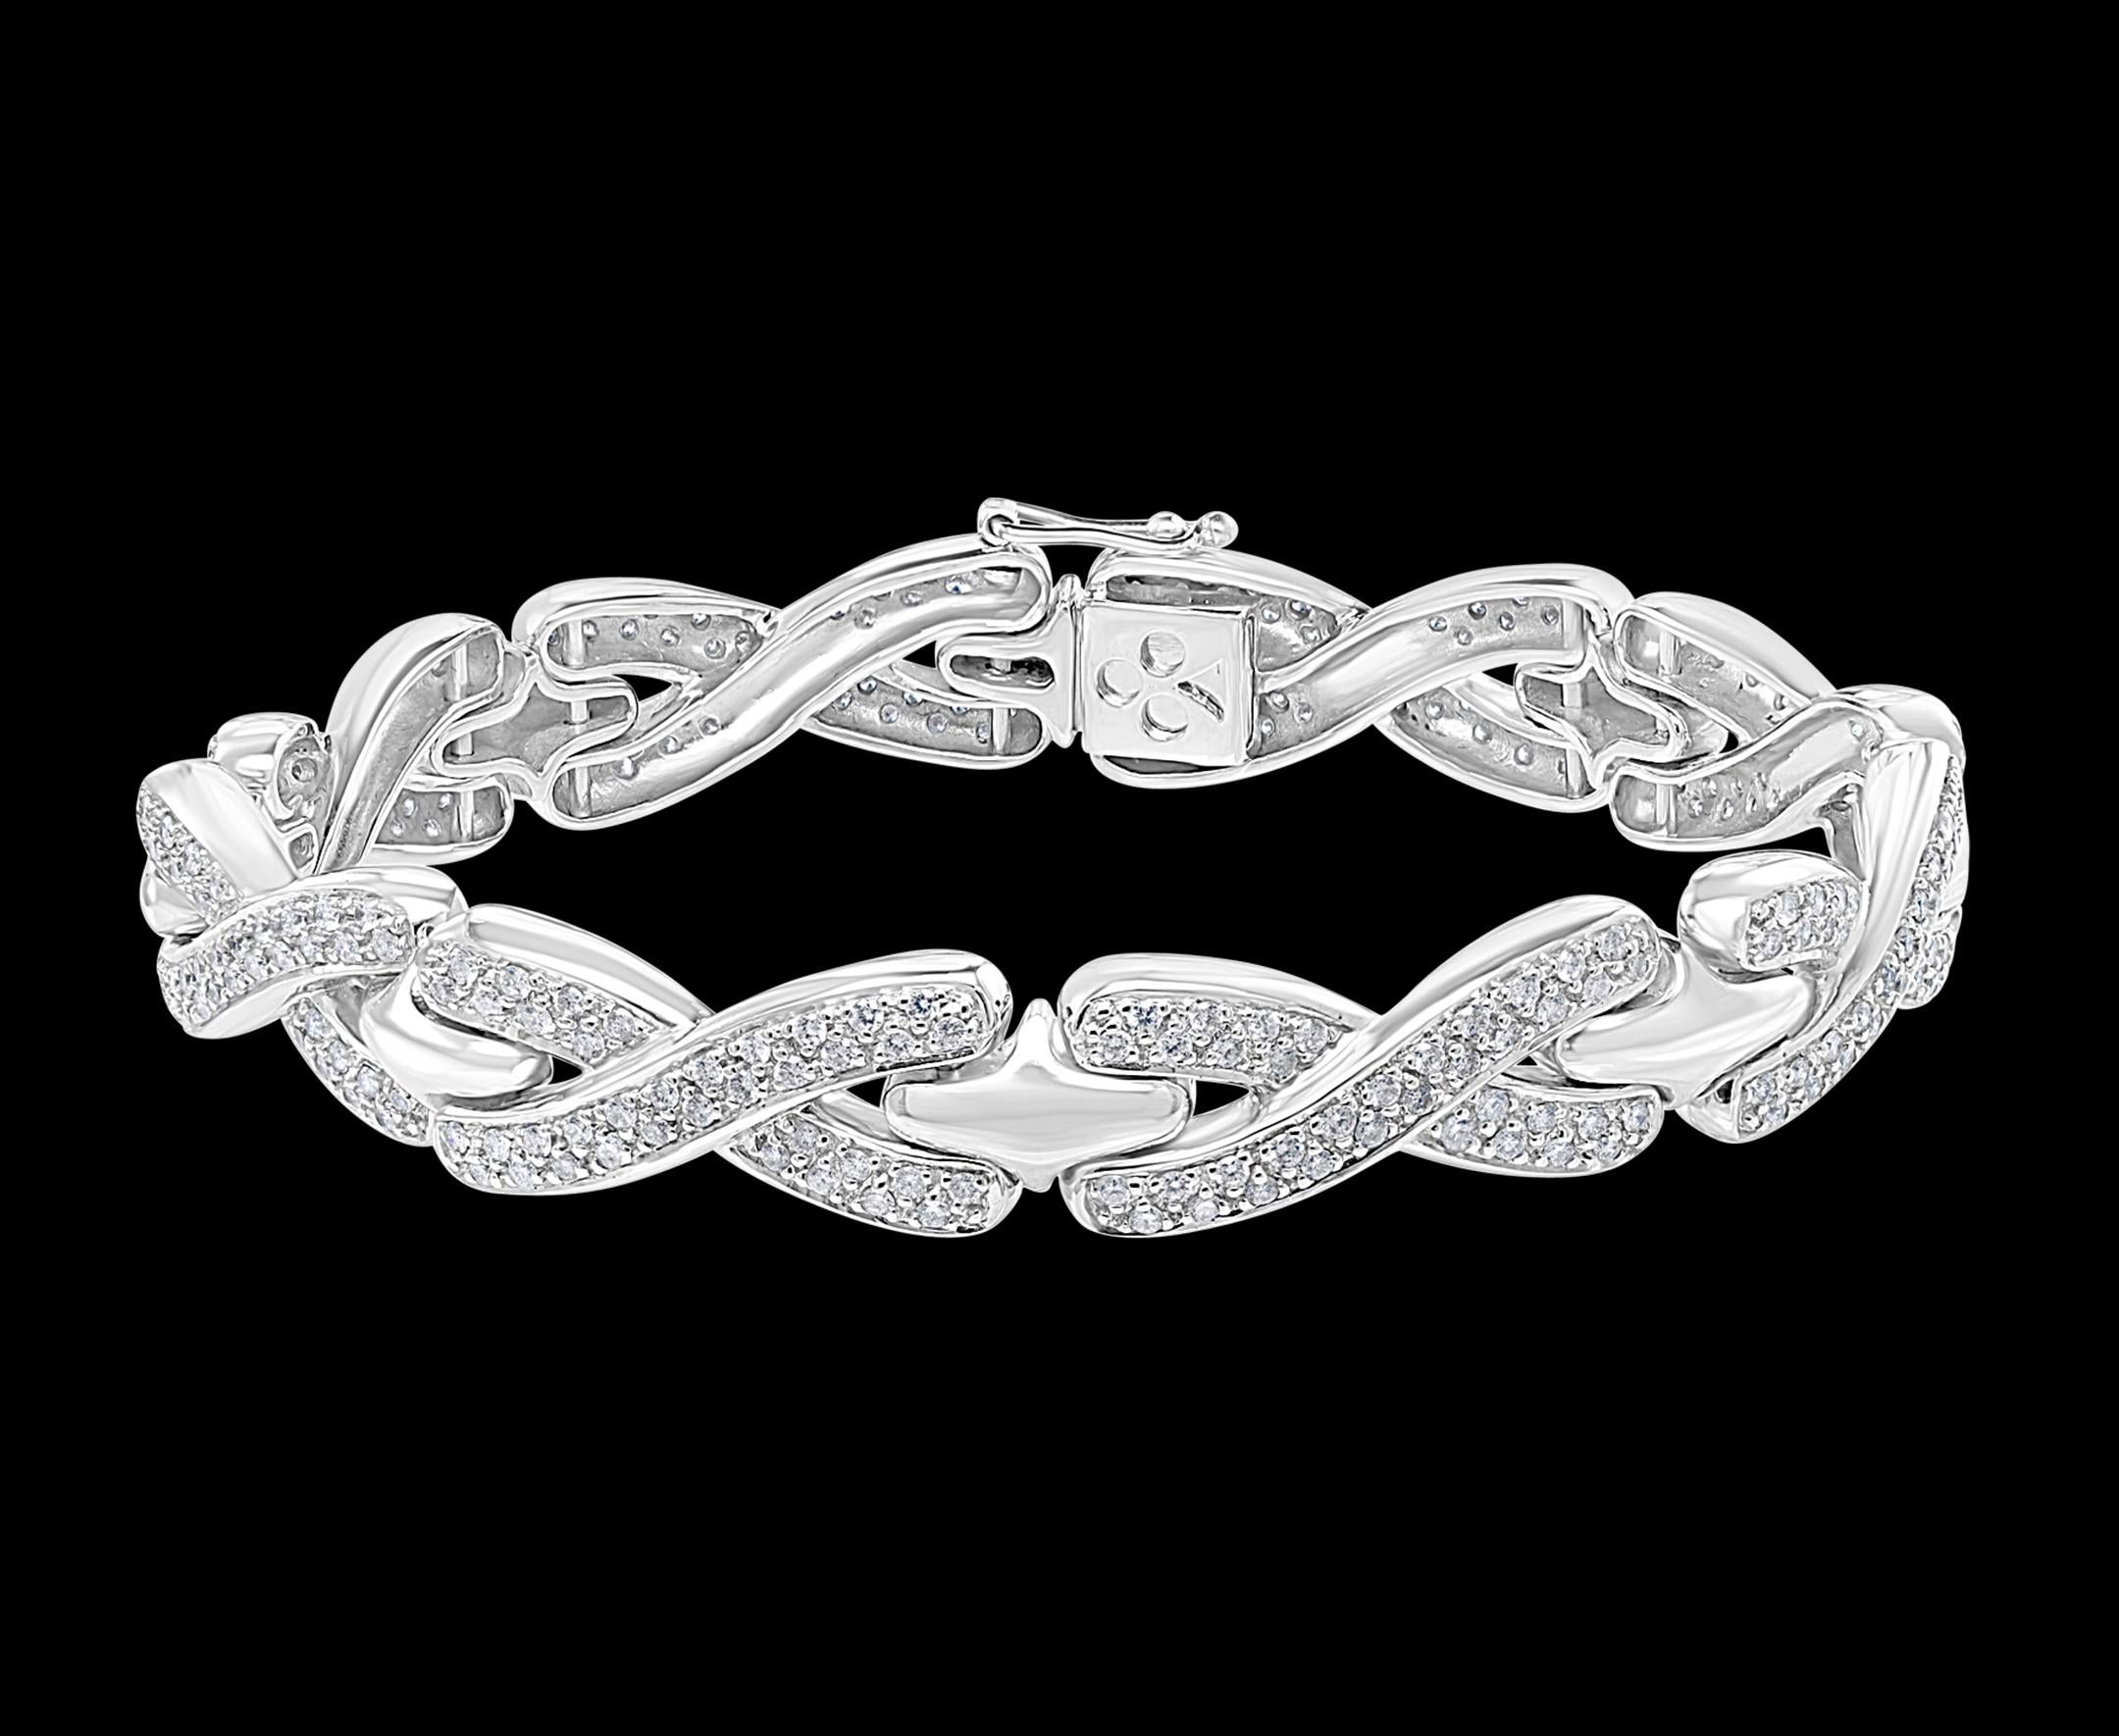 A statement of true, classic elegance, this 18 karat White Gold  Bracelet with Pave Diamond  from signature collection. The interlocking  links of diamonds   provide flexibility with a fabric-like movement. This makes for a very comfortable,